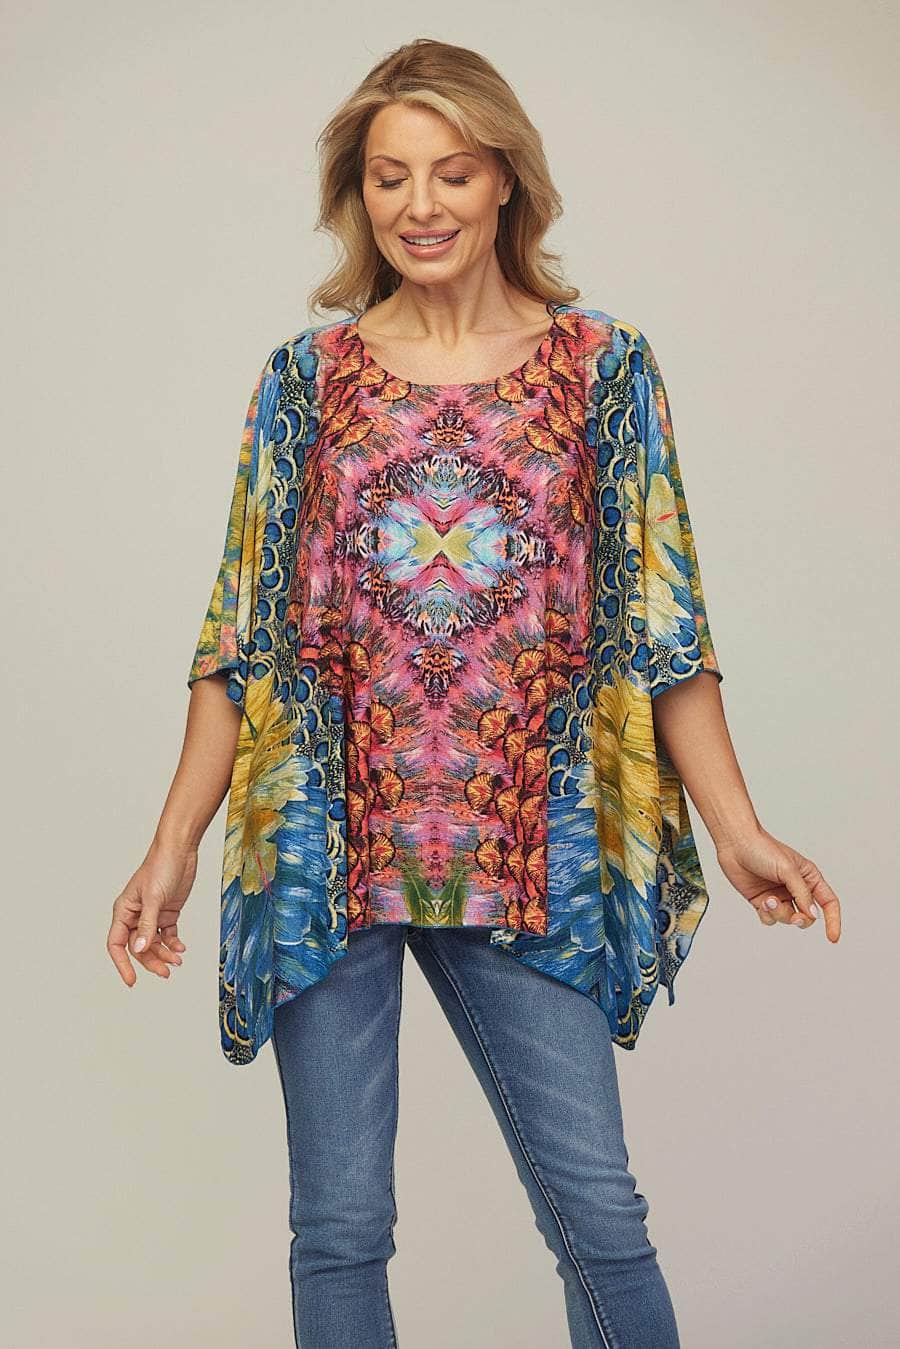 Saloos Top Multi-Colour / One Size 4653-2872